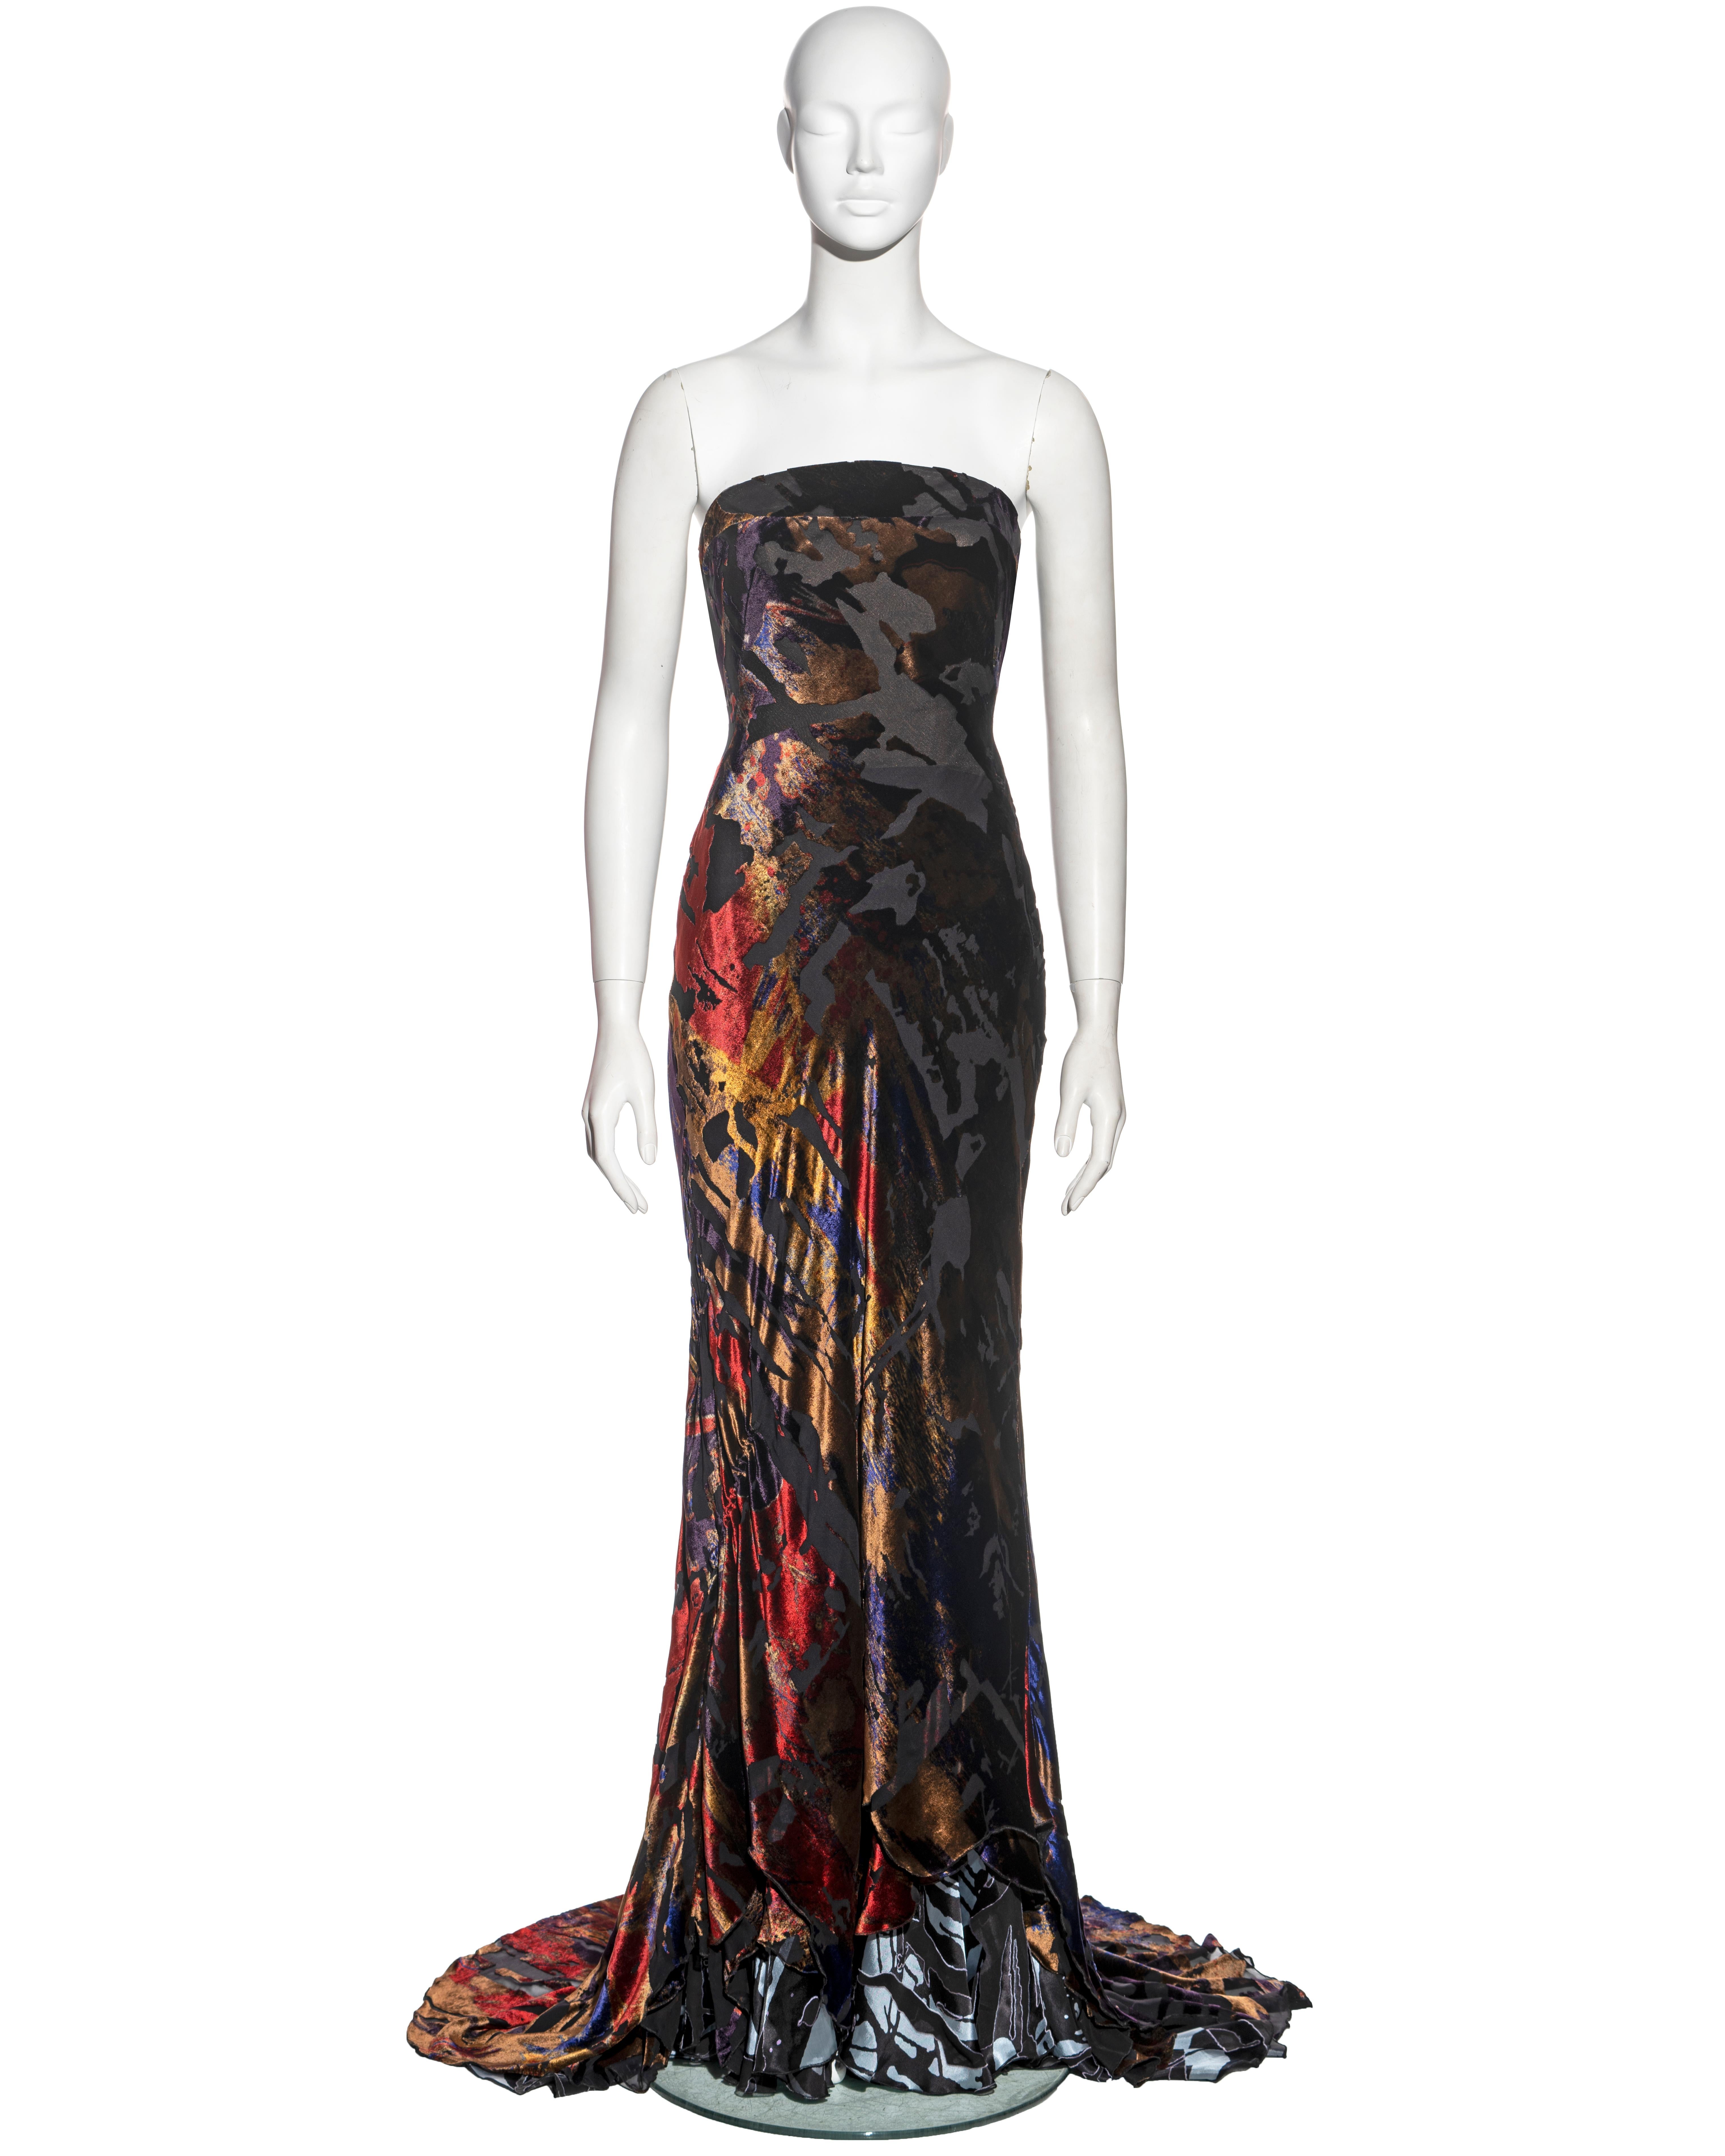 ▪ Christian Lacroix strapless evening dress
▪ Sold by One of a Kind Archive
▪ Constructed from silk devoré; a fabric technique particularly used on velvets, where a mixed-fibre material undergoes a chemical process to dissolve the cellulose fibres